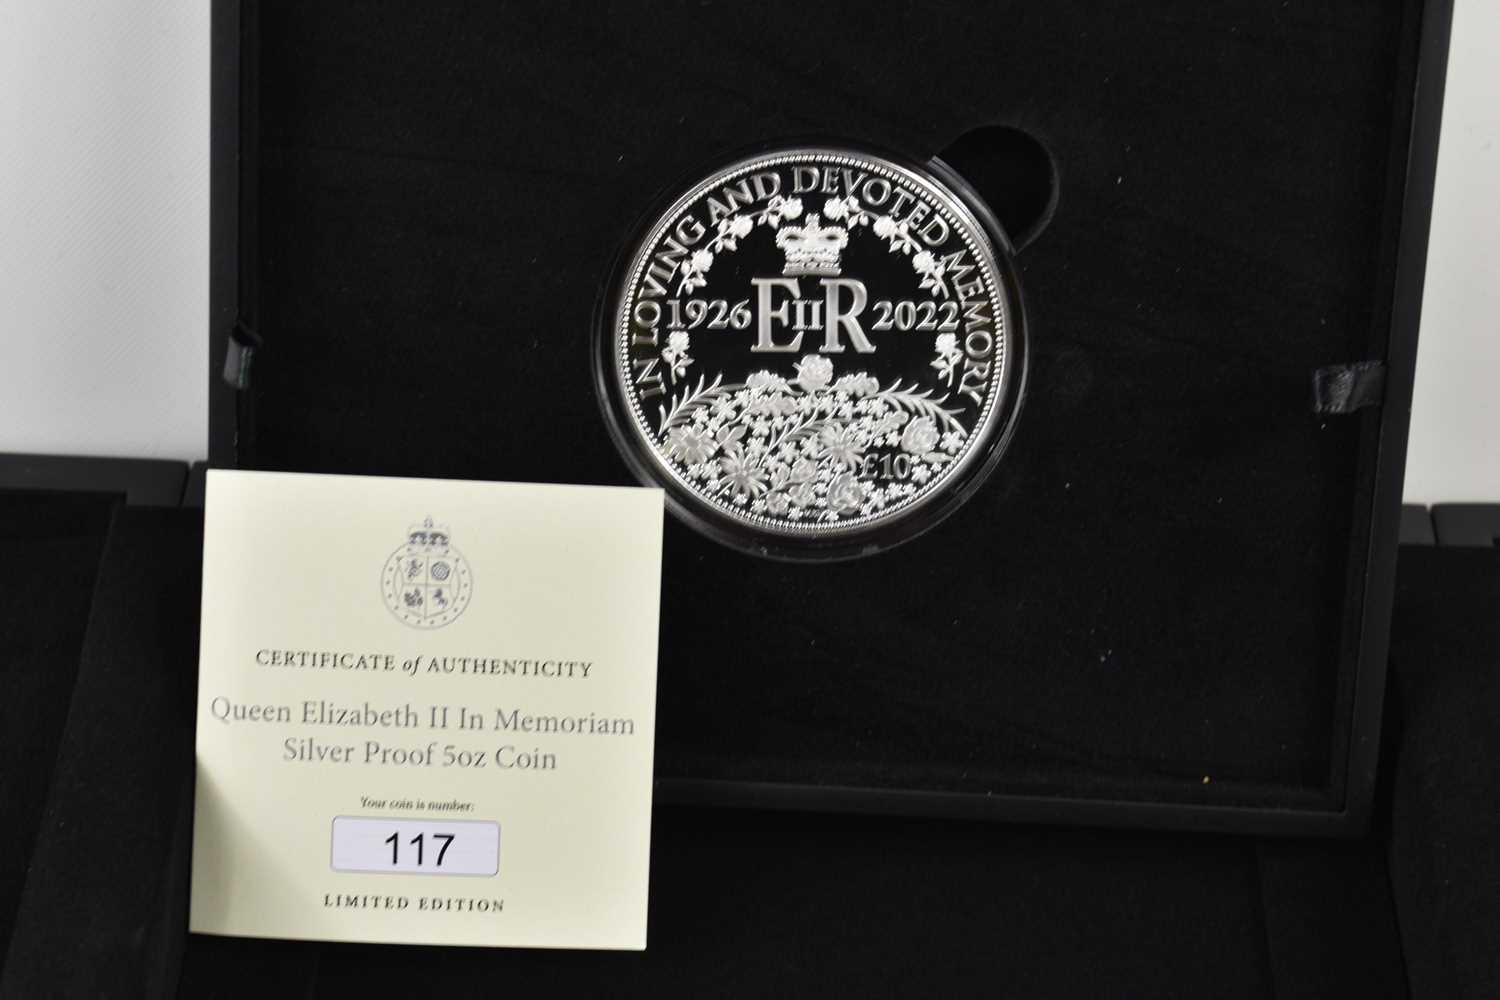 A limited edition Queen Elizabeth II in Memoriam Silver Proof 5oz coin, issued in 2023, weight 155. - Image 2 of 2